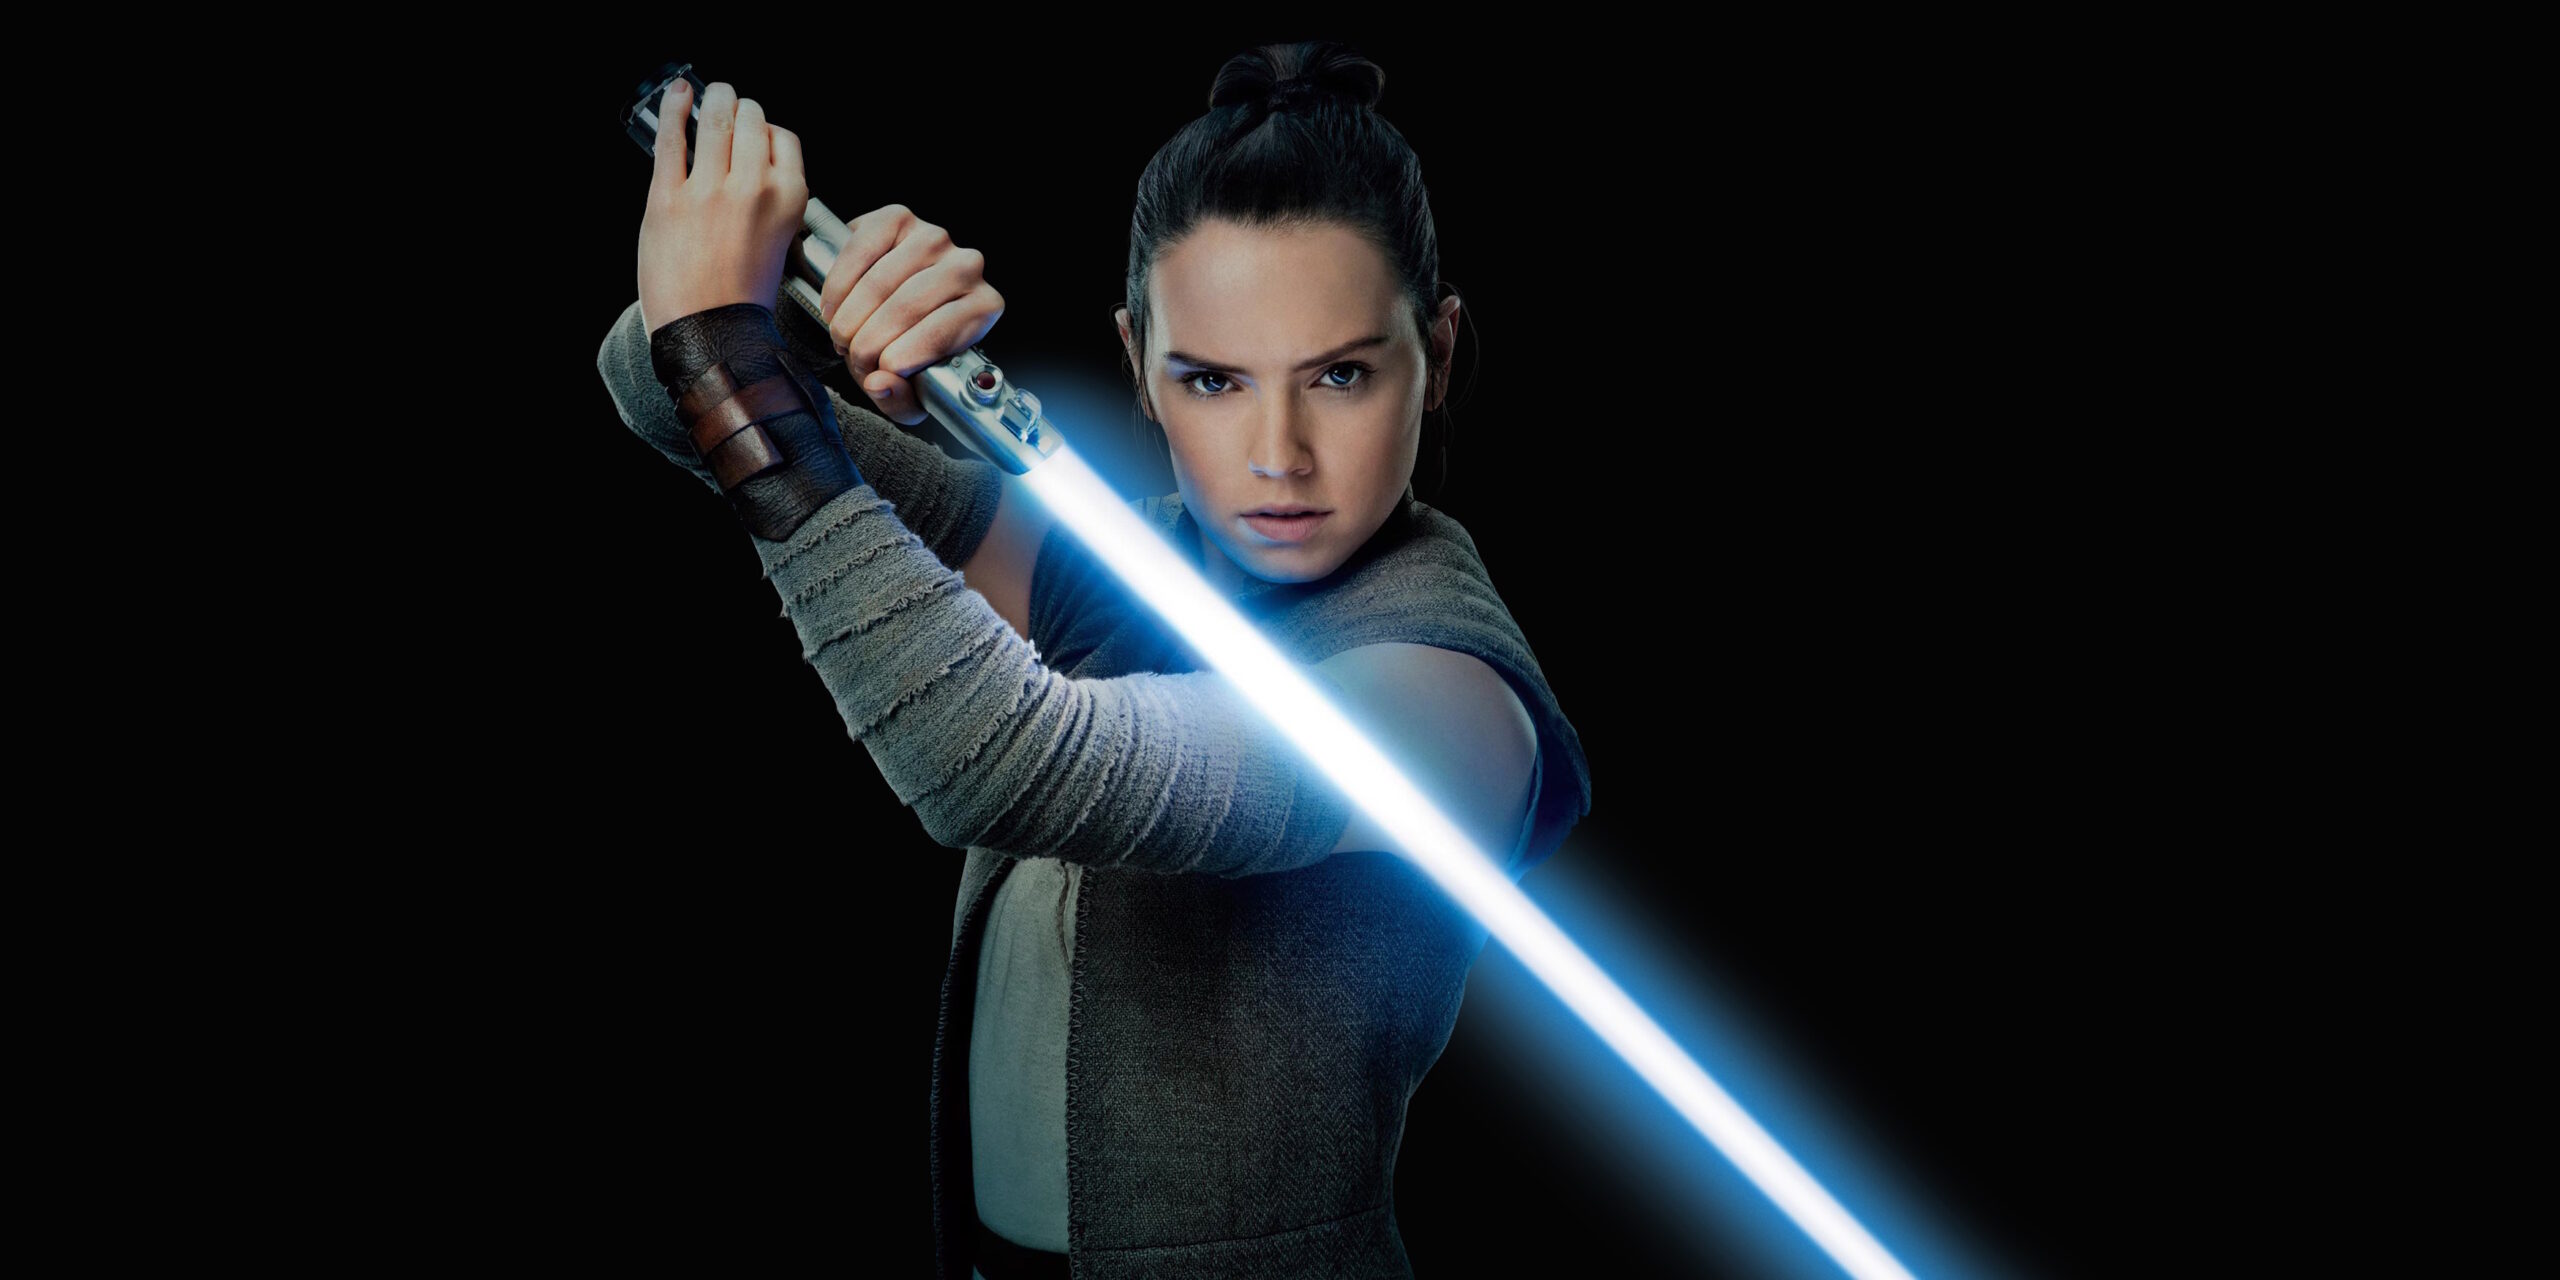 According to the latest Star Wars Barside Buzz the Rey Sequel movie is currently casting three major roles.